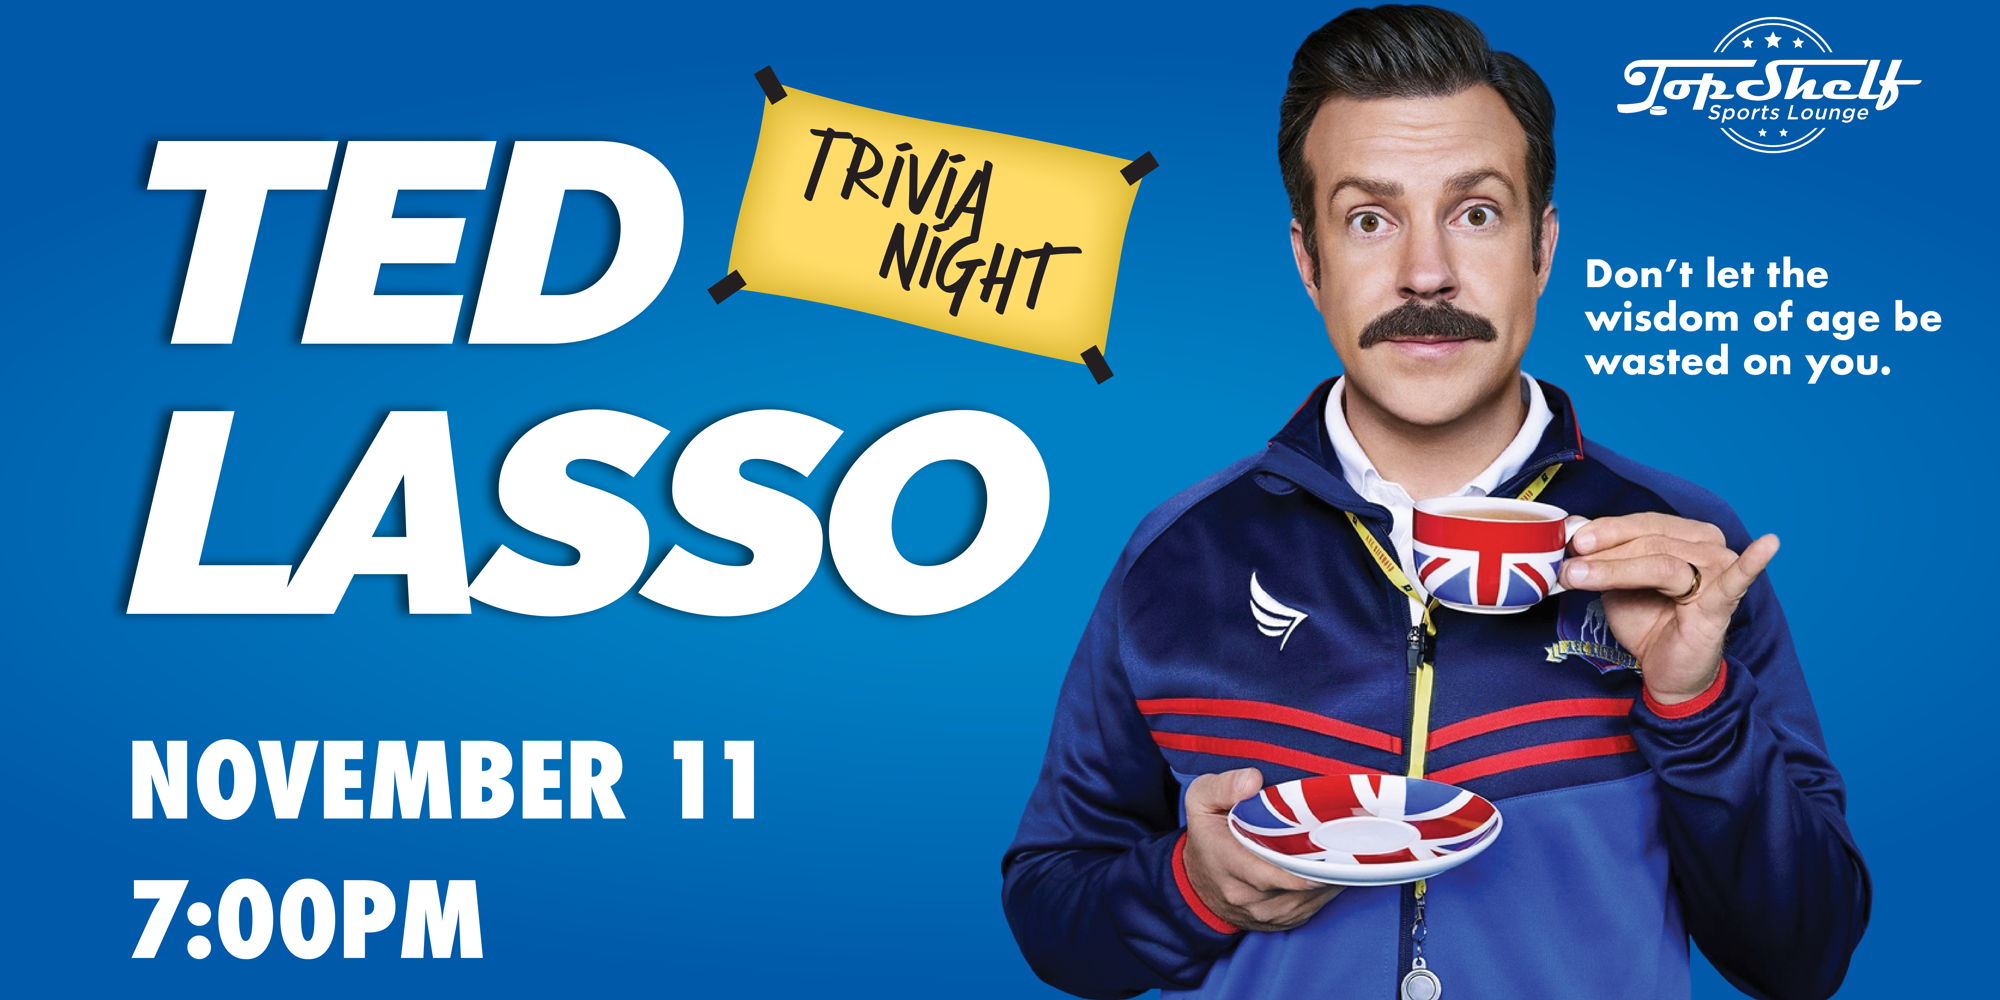 Ted Lasso Trivia Night promotional image